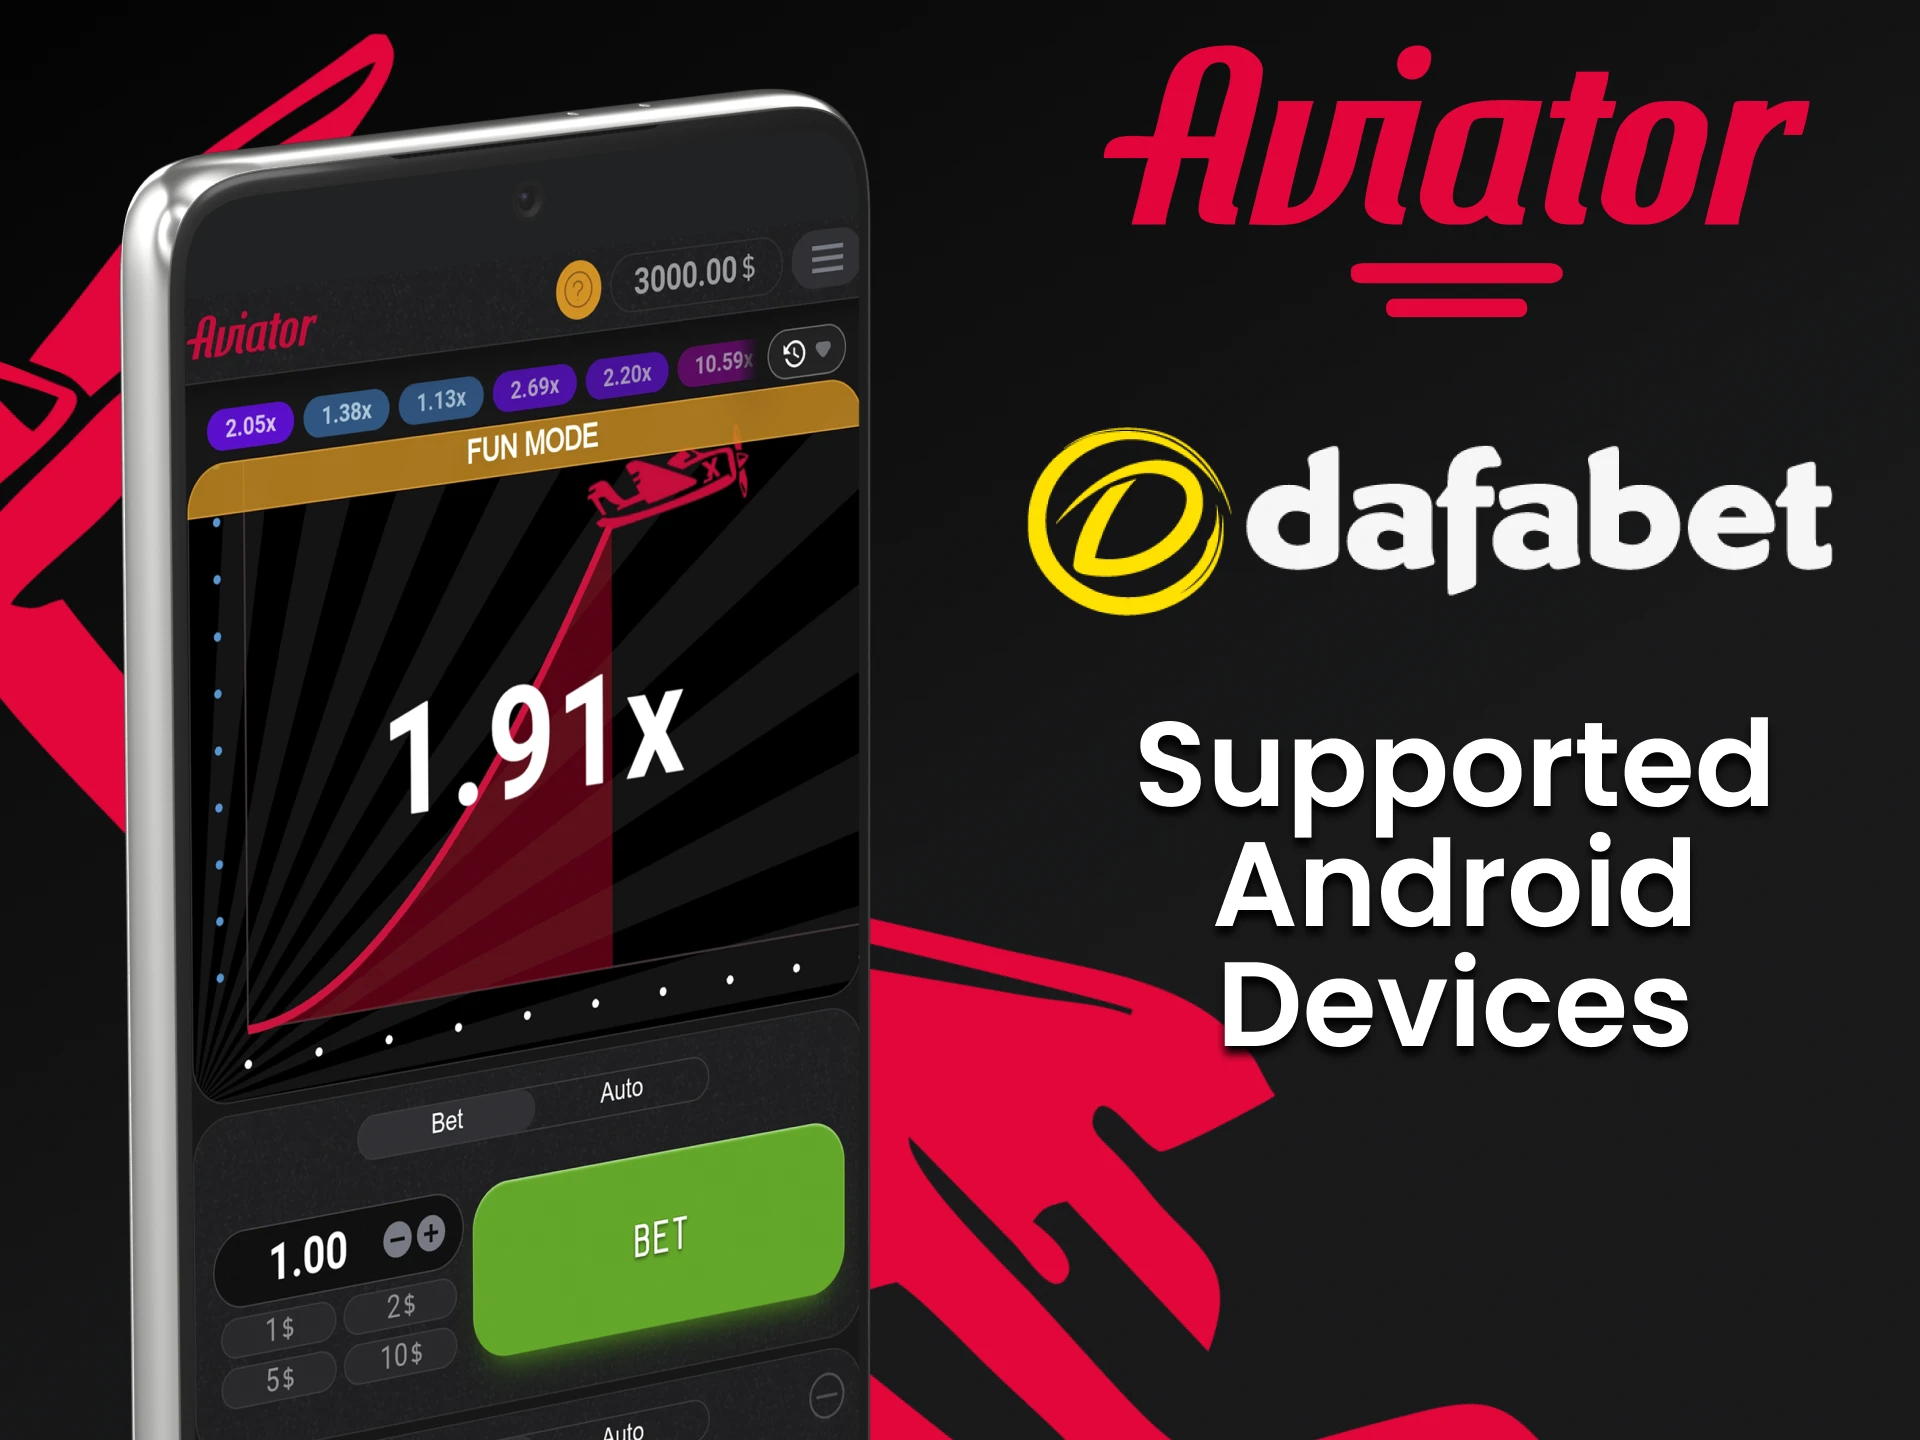 Play Aviator on Dafabet through your android device.